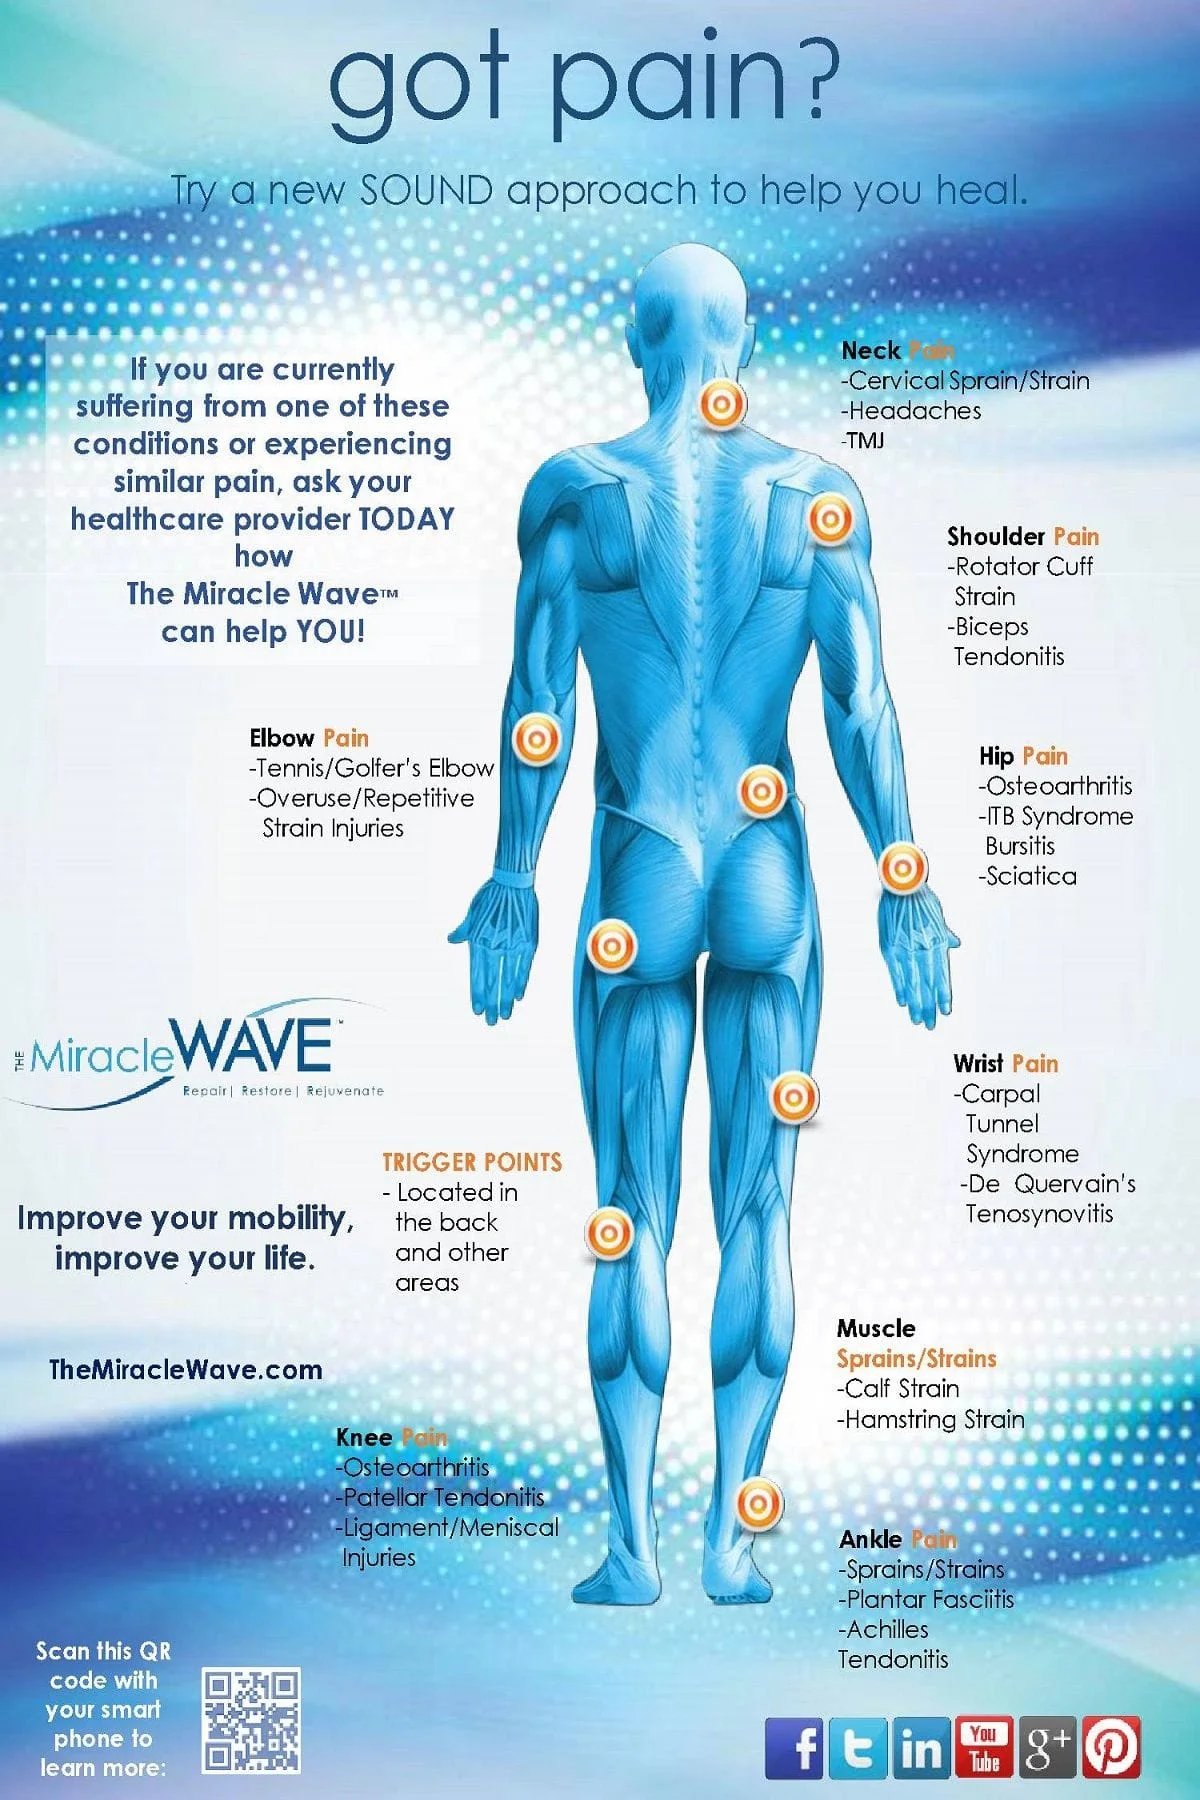 Miracle wave - got pain?